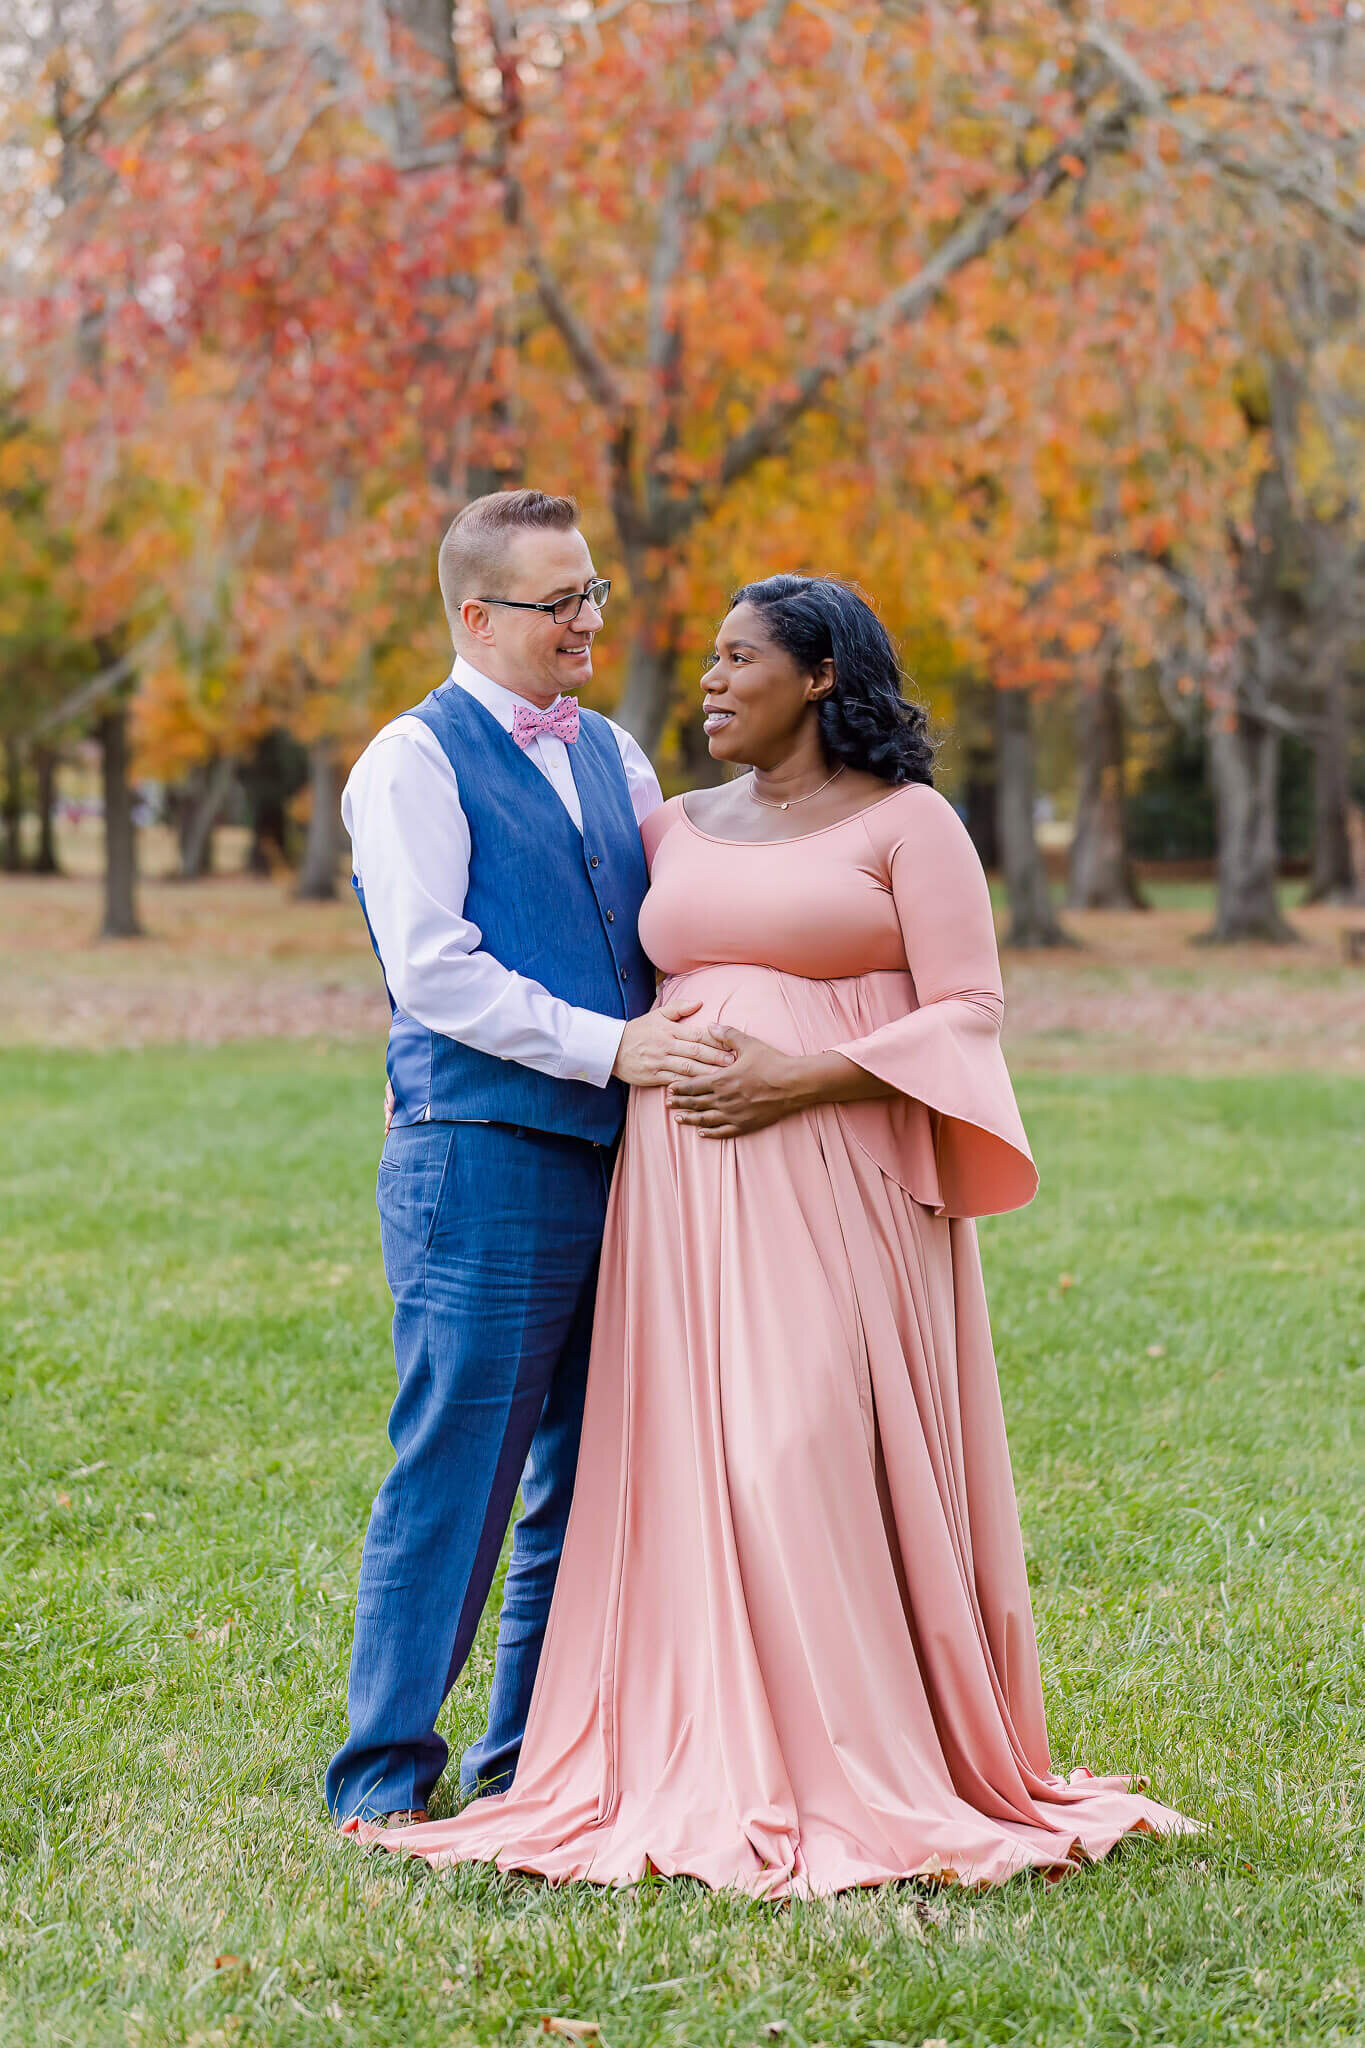 An expecting couple posing in a field for a maternity portrait session.